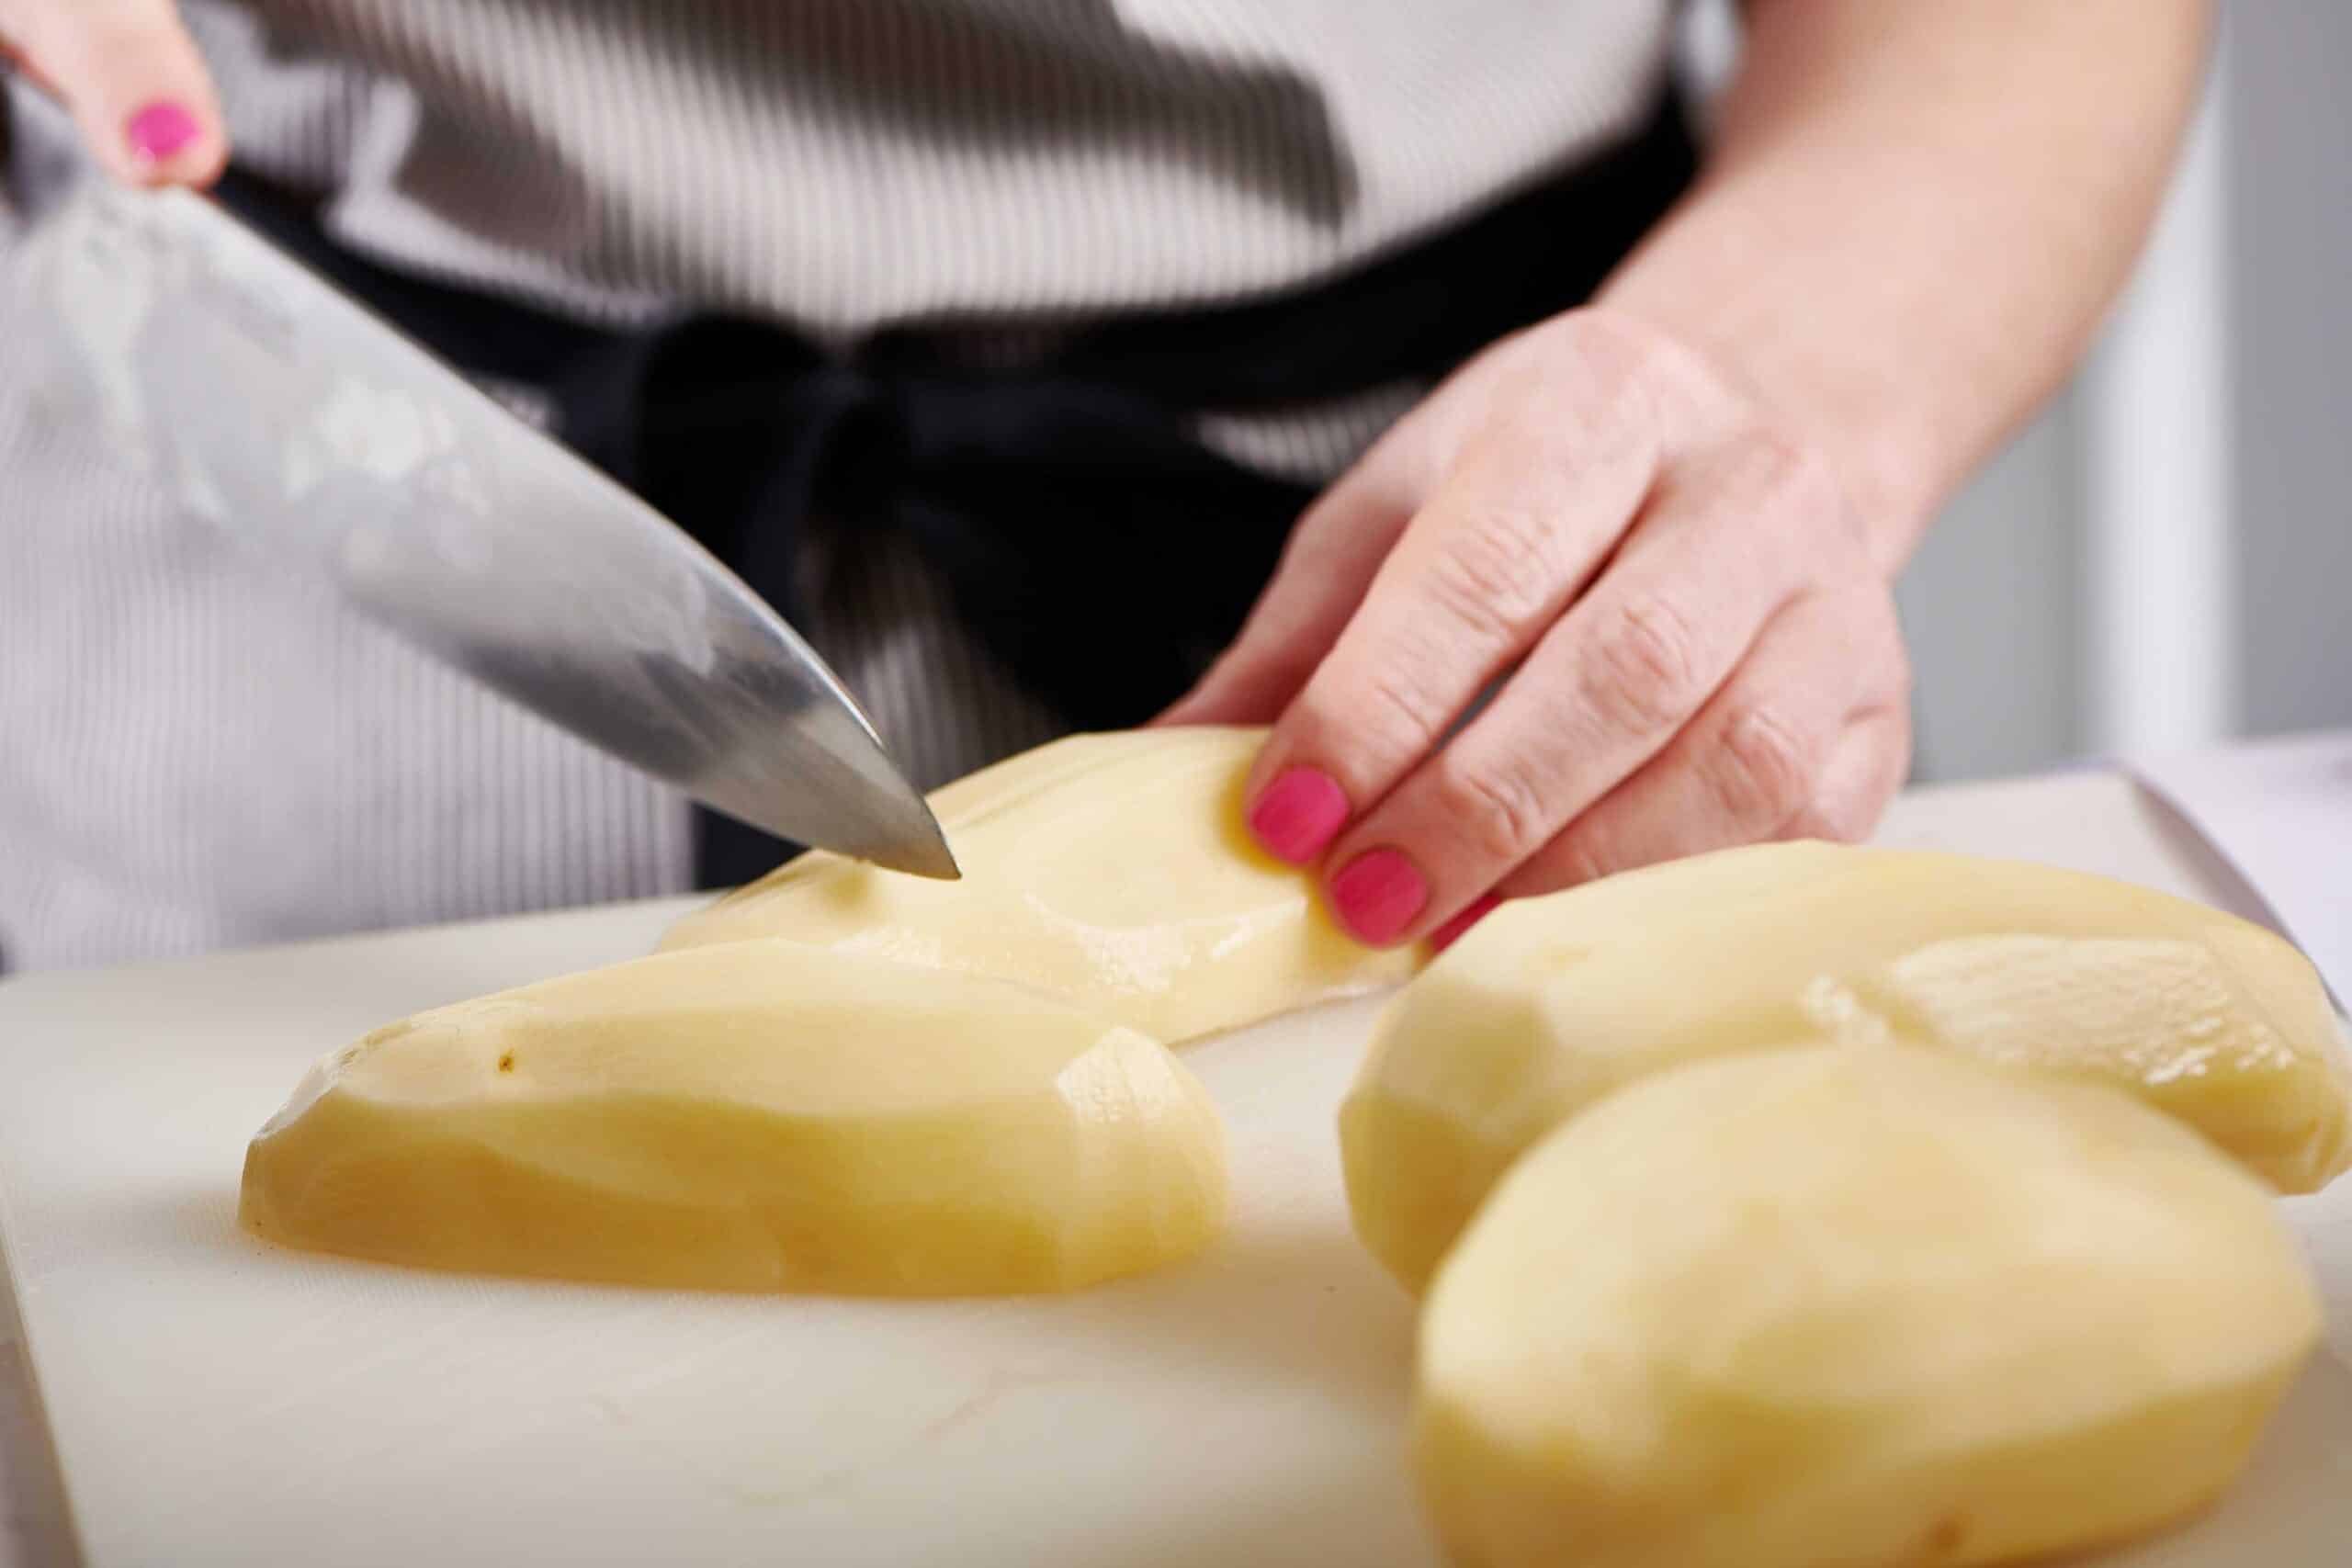 Slicing potatoes on cutting board with chef knife.